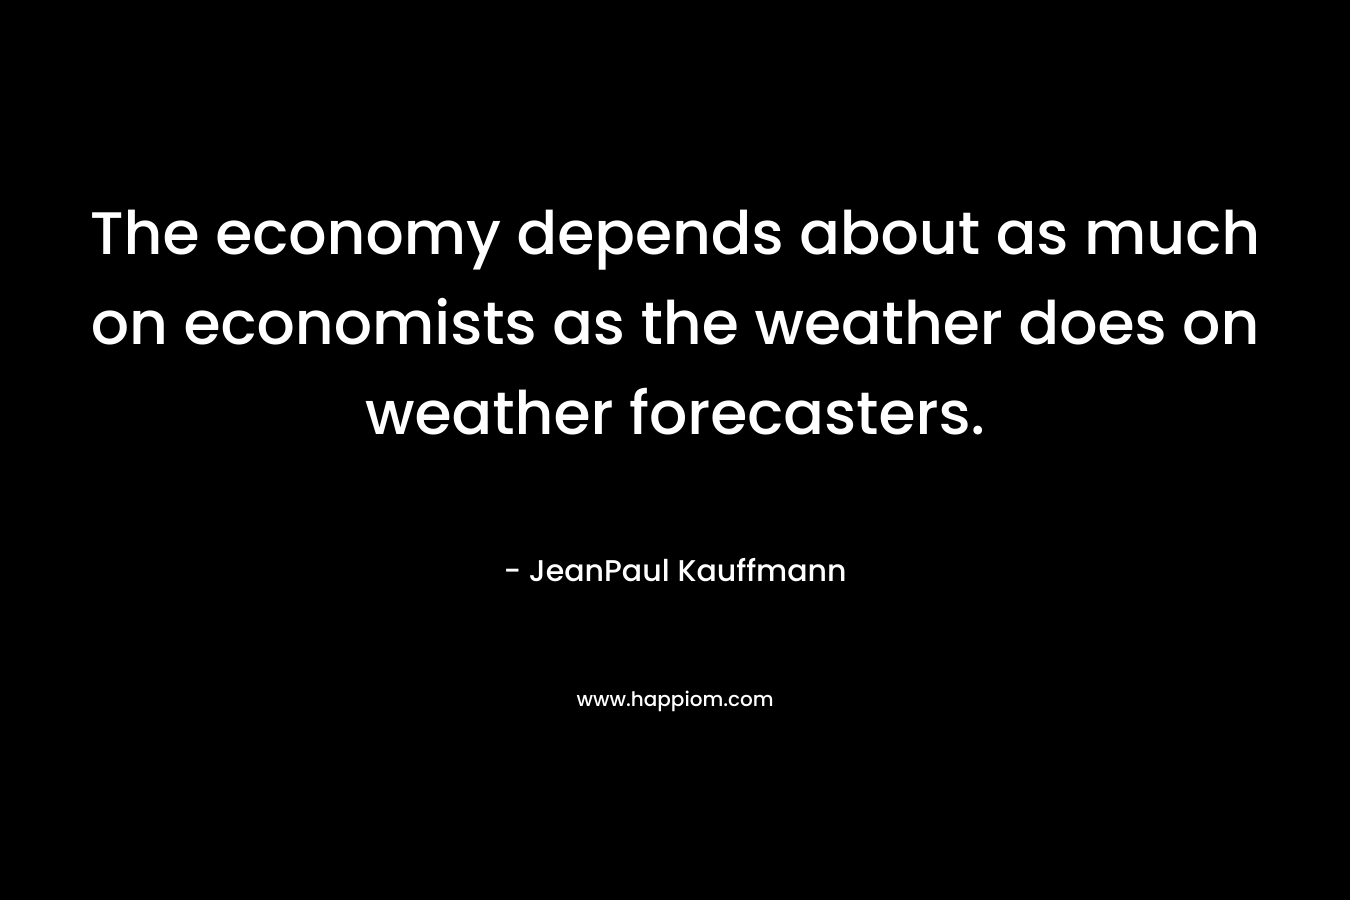 The economy depends about as much on economists as the weather does on weather forecasters. – JeanPaul Kauffmann